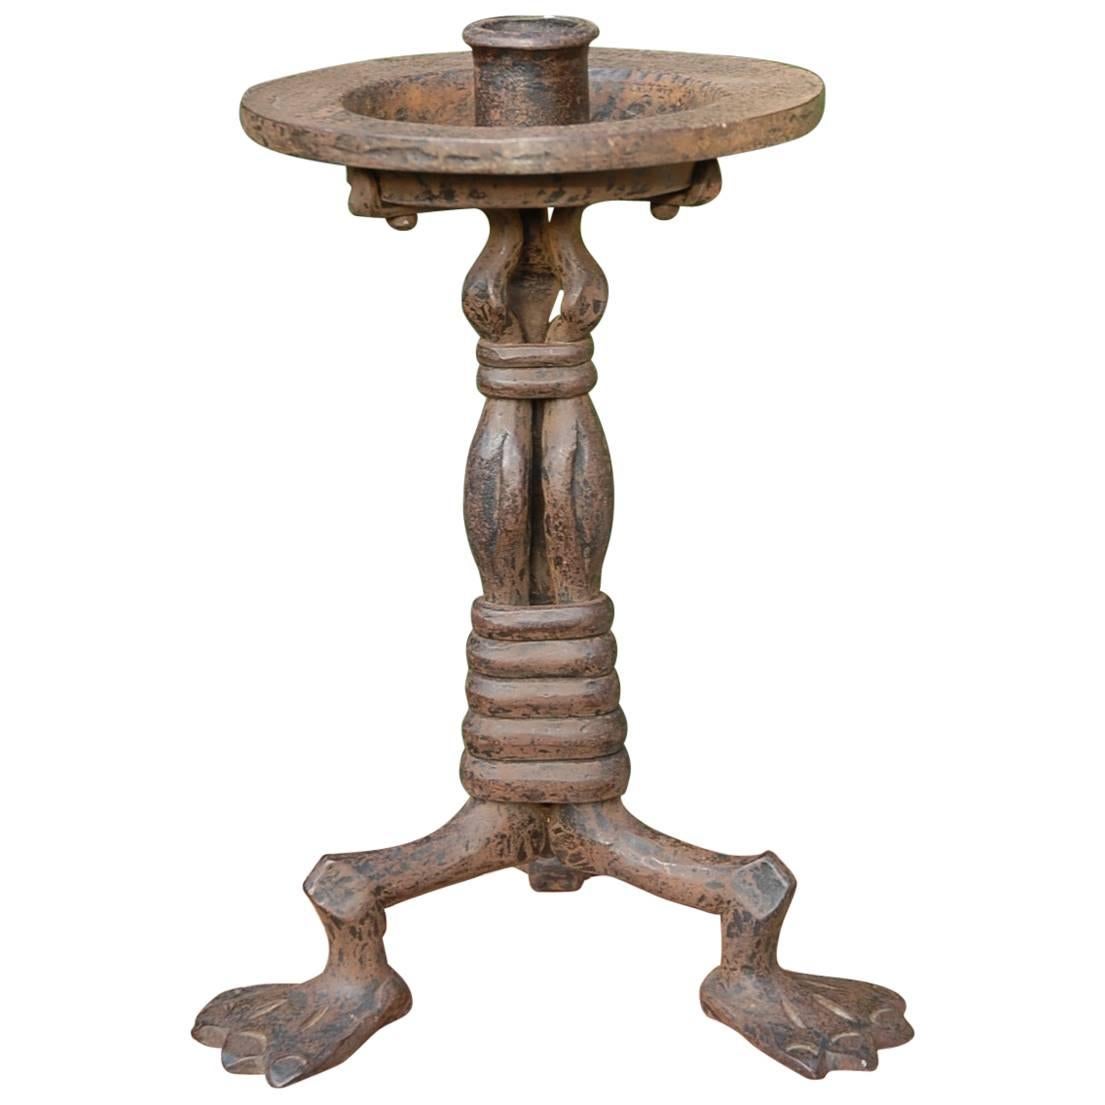 Unique Hand Forged in Fire Artistic Design Candlestick with Three Frog like Legs